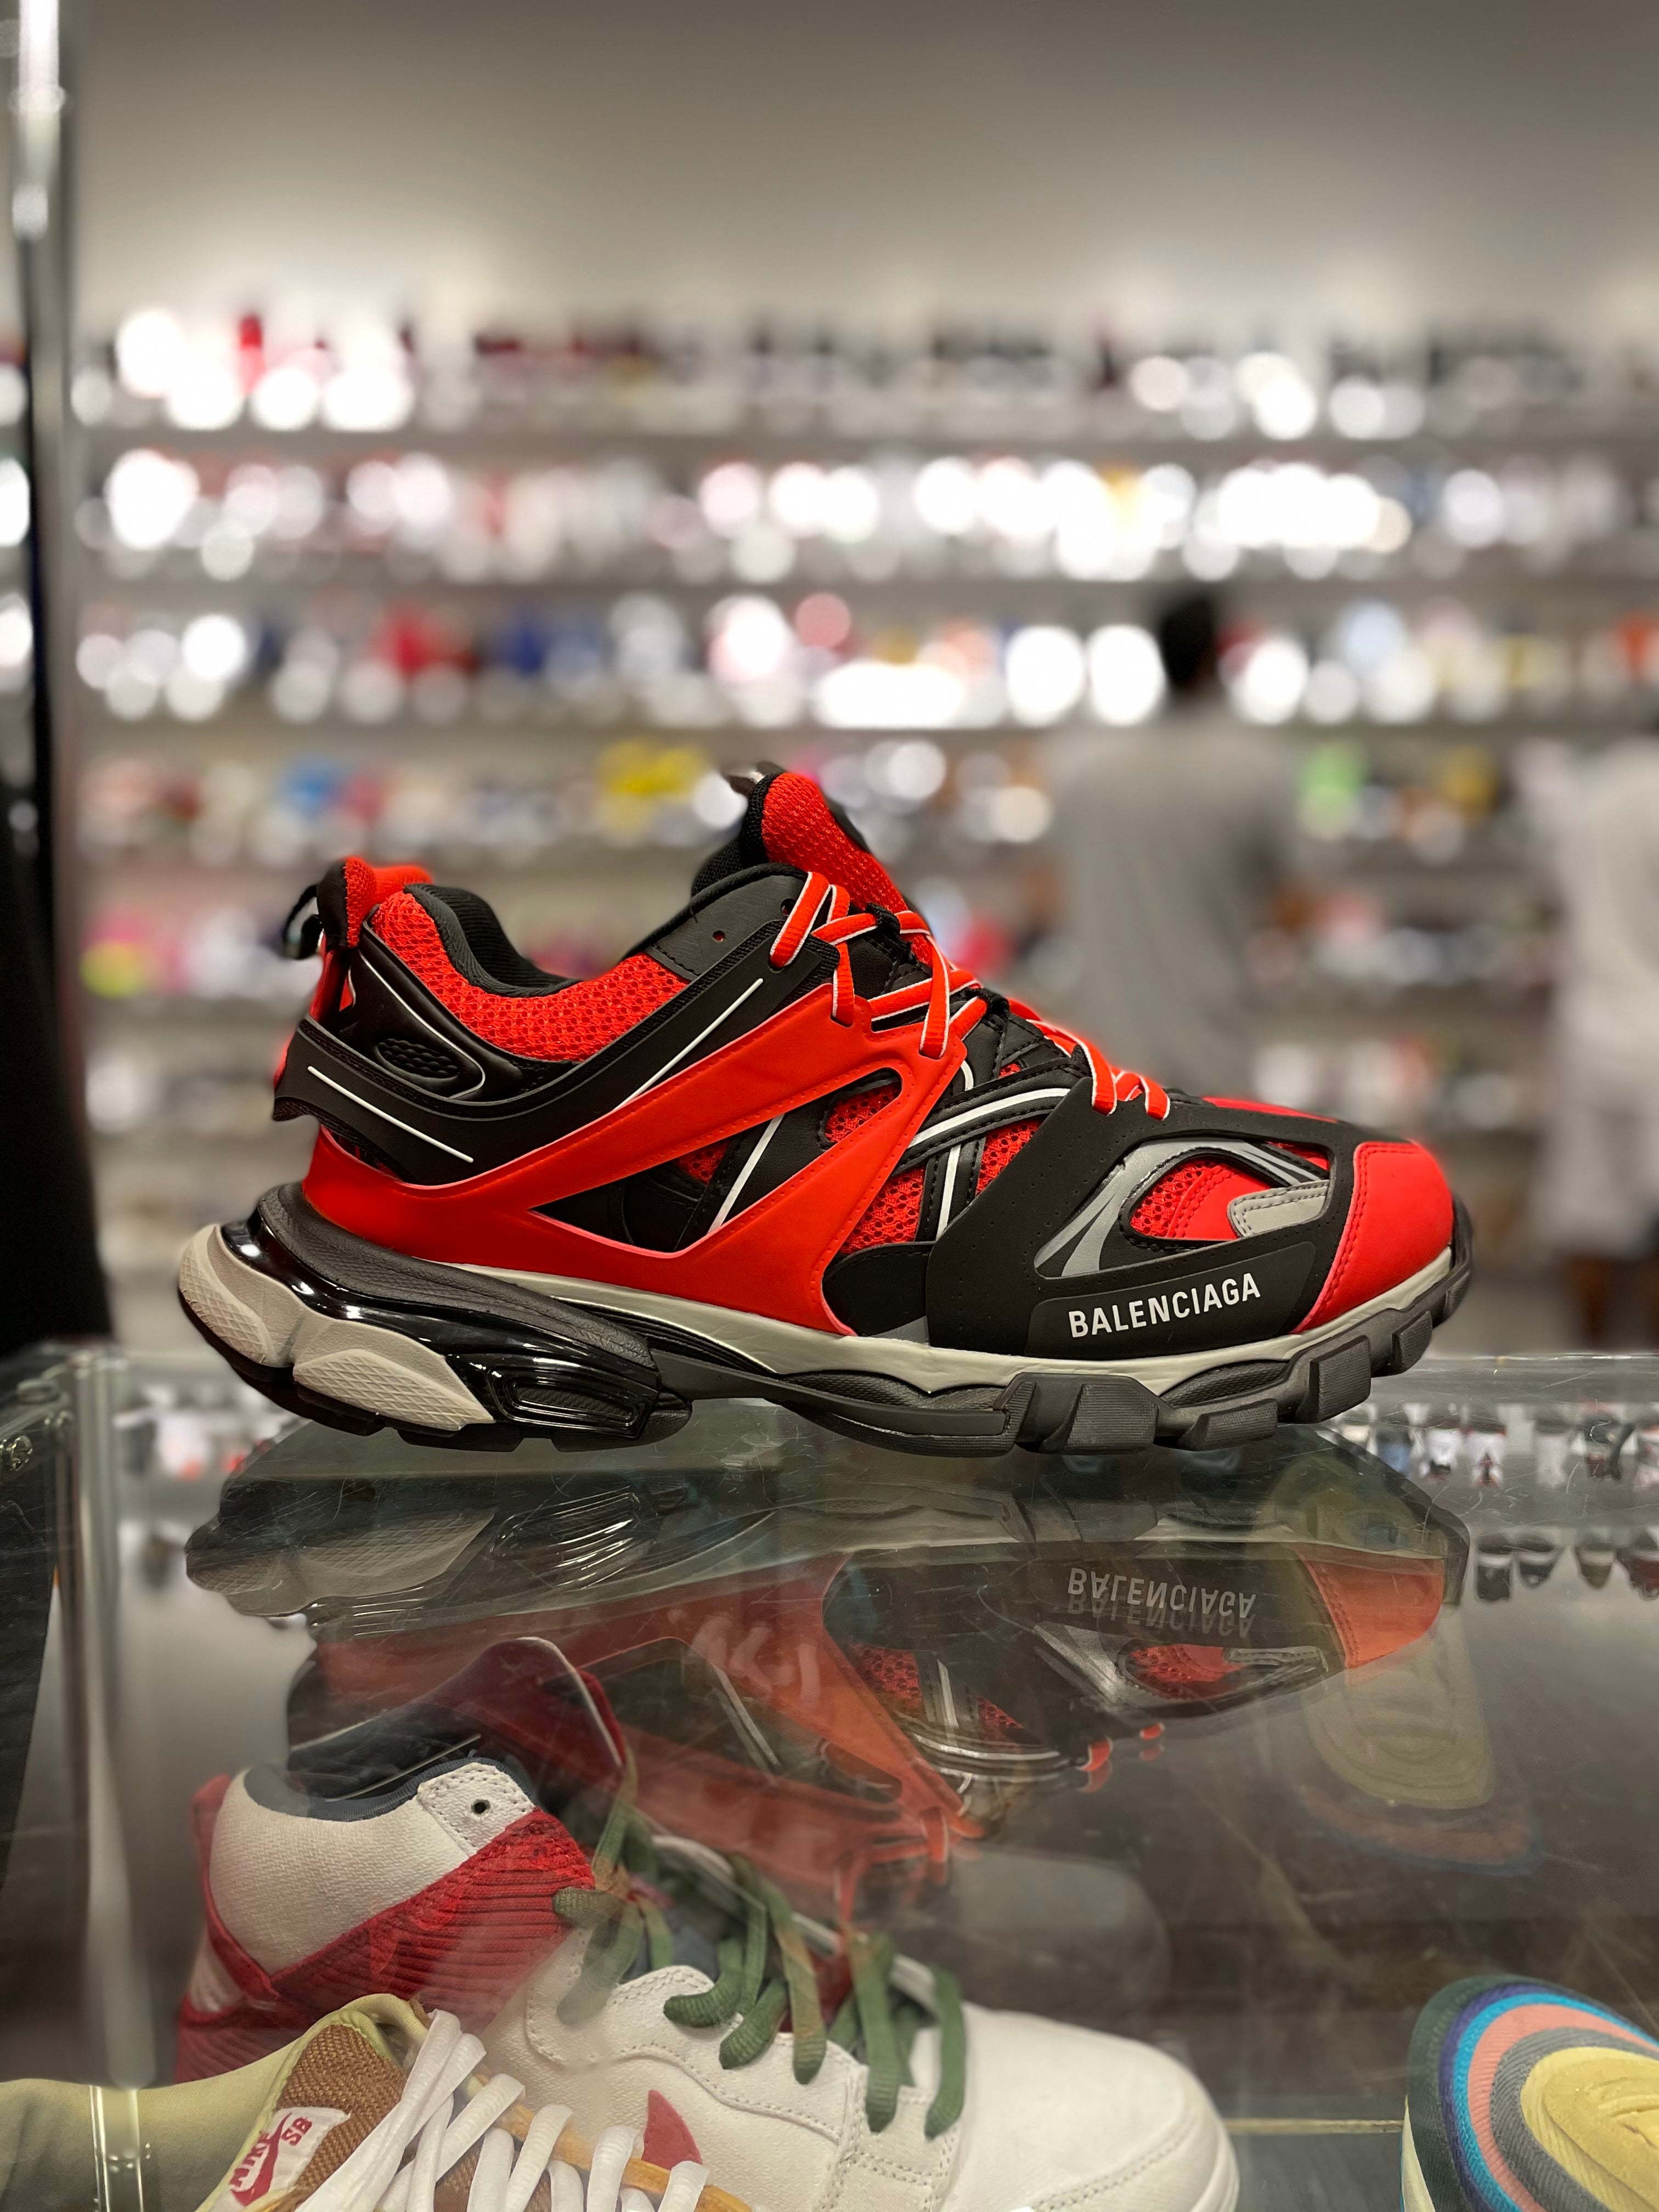 Balenciaga Track Runner Sneakers, Red, Size 37 = US